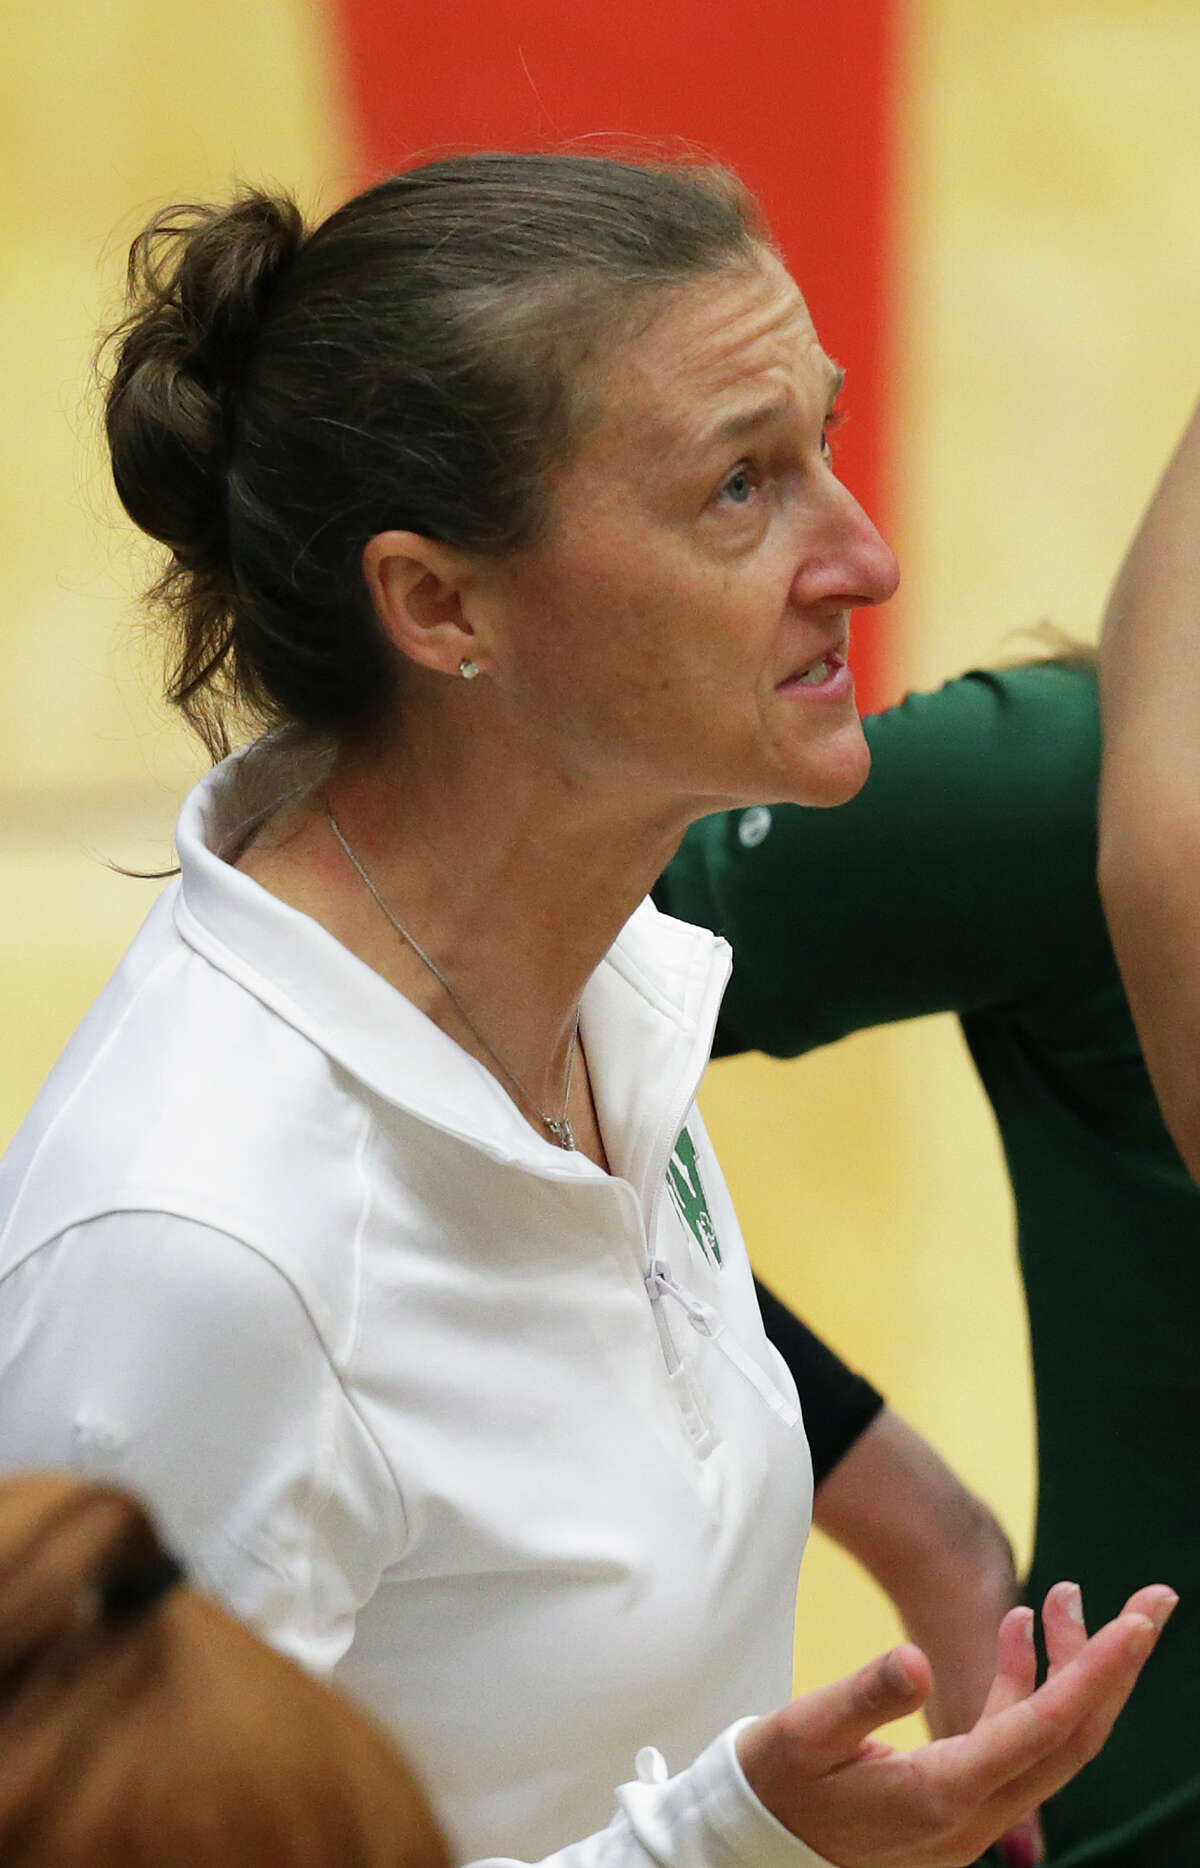 Incarnate Word coach April Fricke talks during a timeout as Antonian wins the TAPPS 2-5A volleyball title by beating Incarnate Word High School 3-0 at Littleton Gym on October 22, 2015.